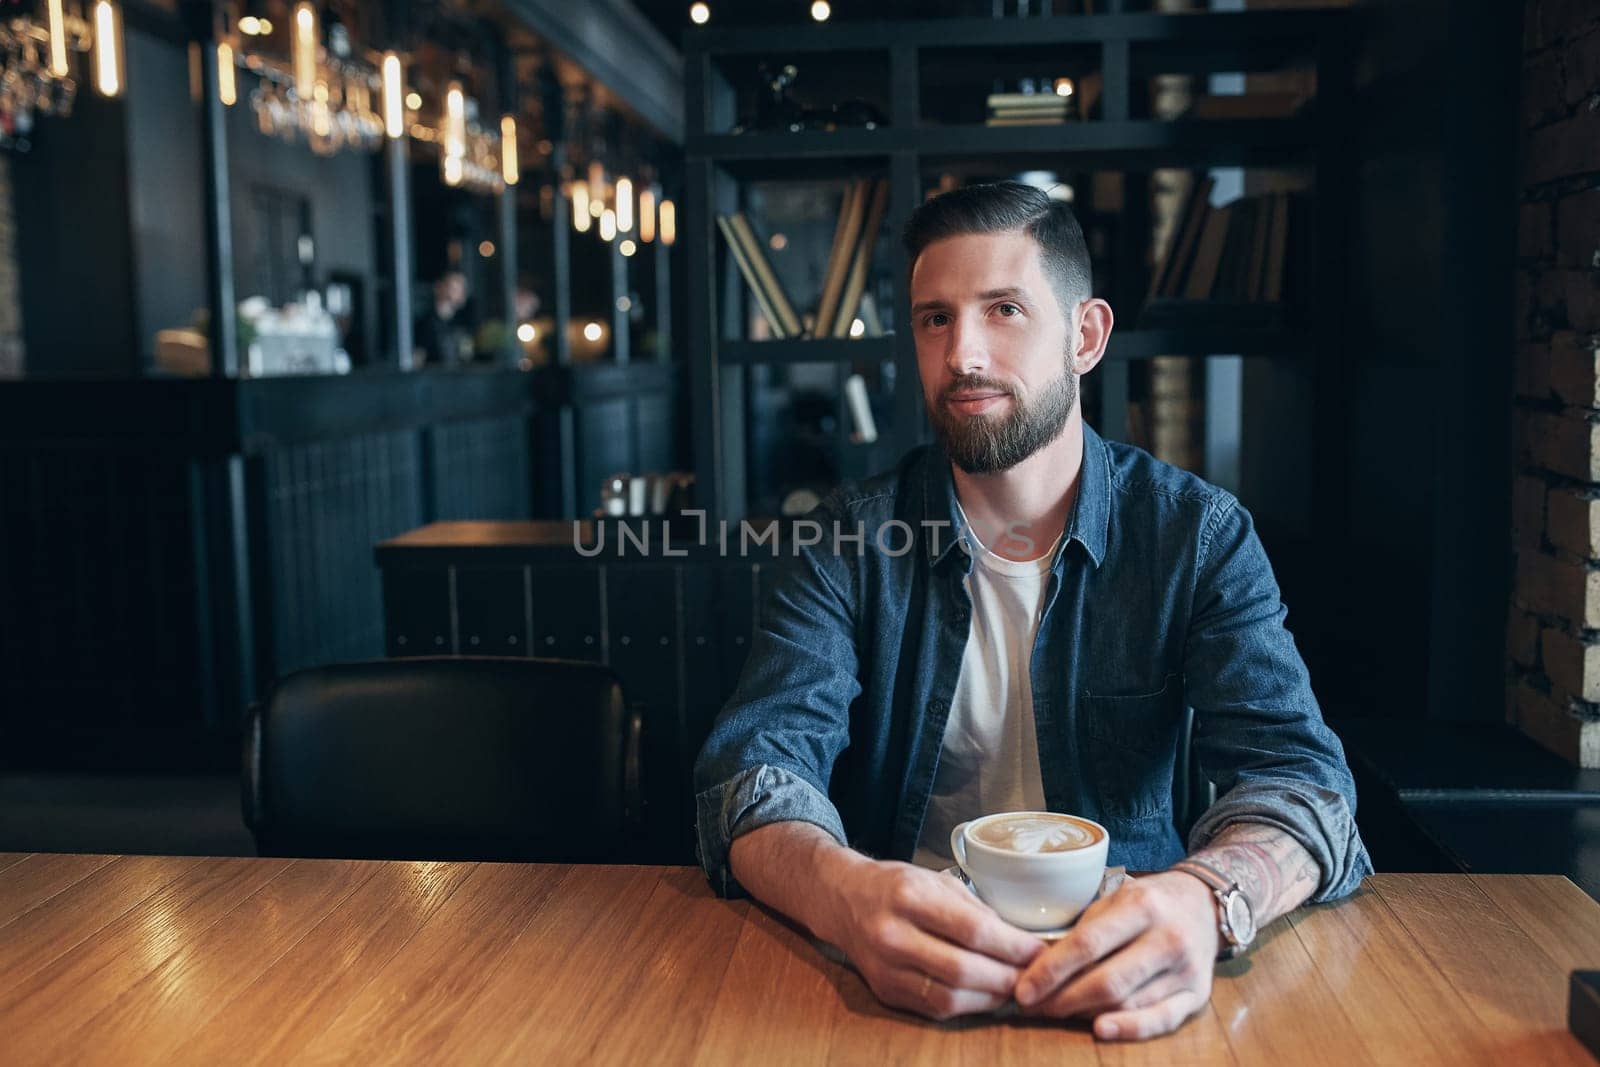 Confident man enjoying a cup of coffee while having work break lunch in modern restaurant, young intelligent man or entrepreneur relaxing in indoors cafe looking pensive